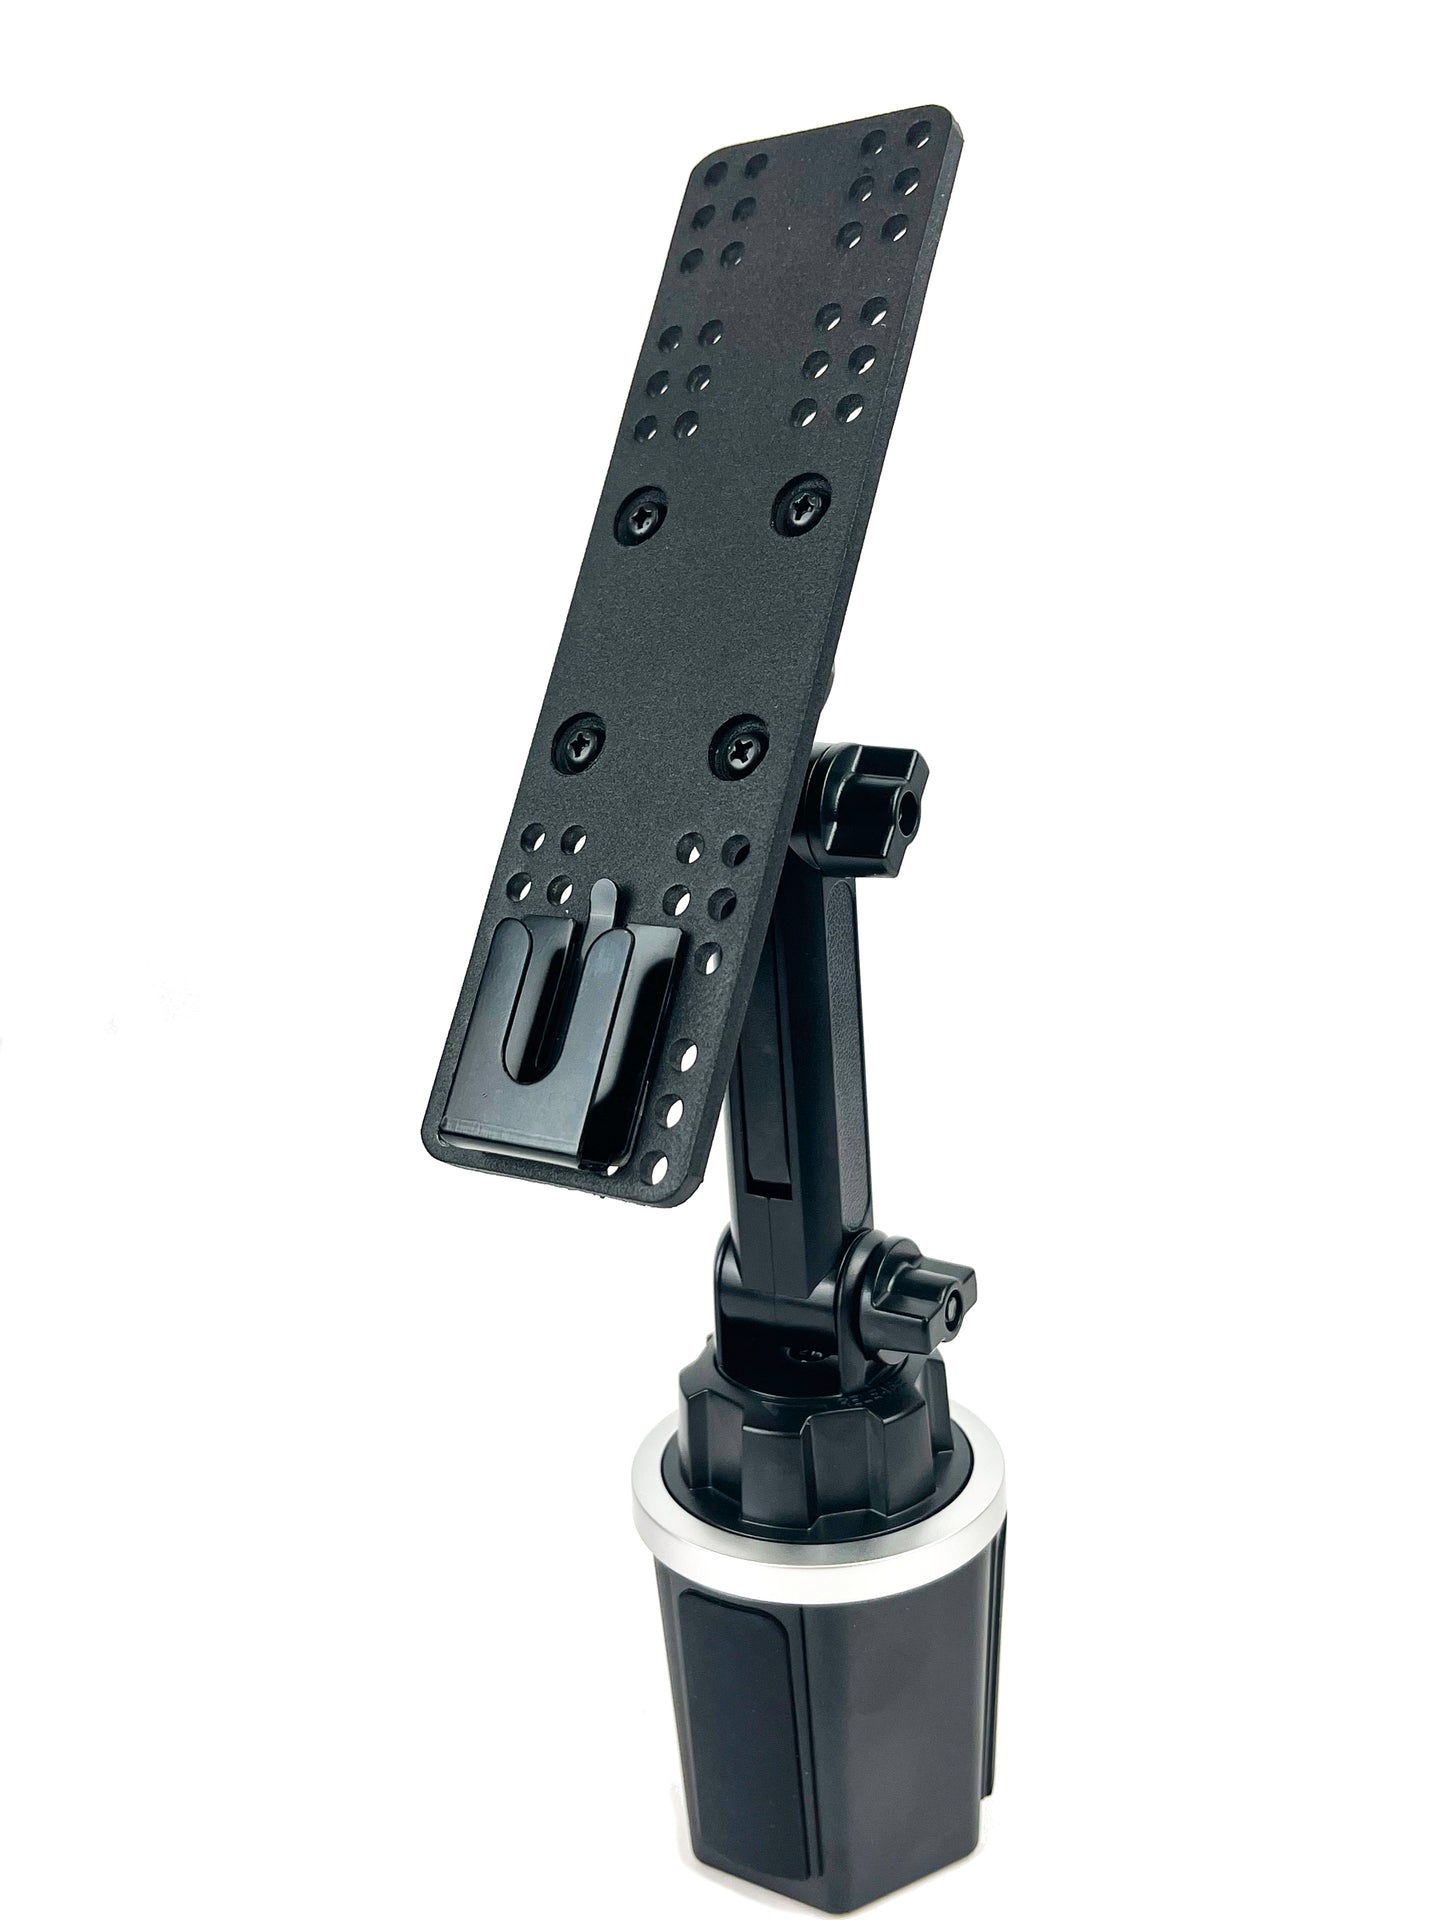 Cup Holder With Adjustable Height Control For DR-735 and DR-638 Remote Heads Only